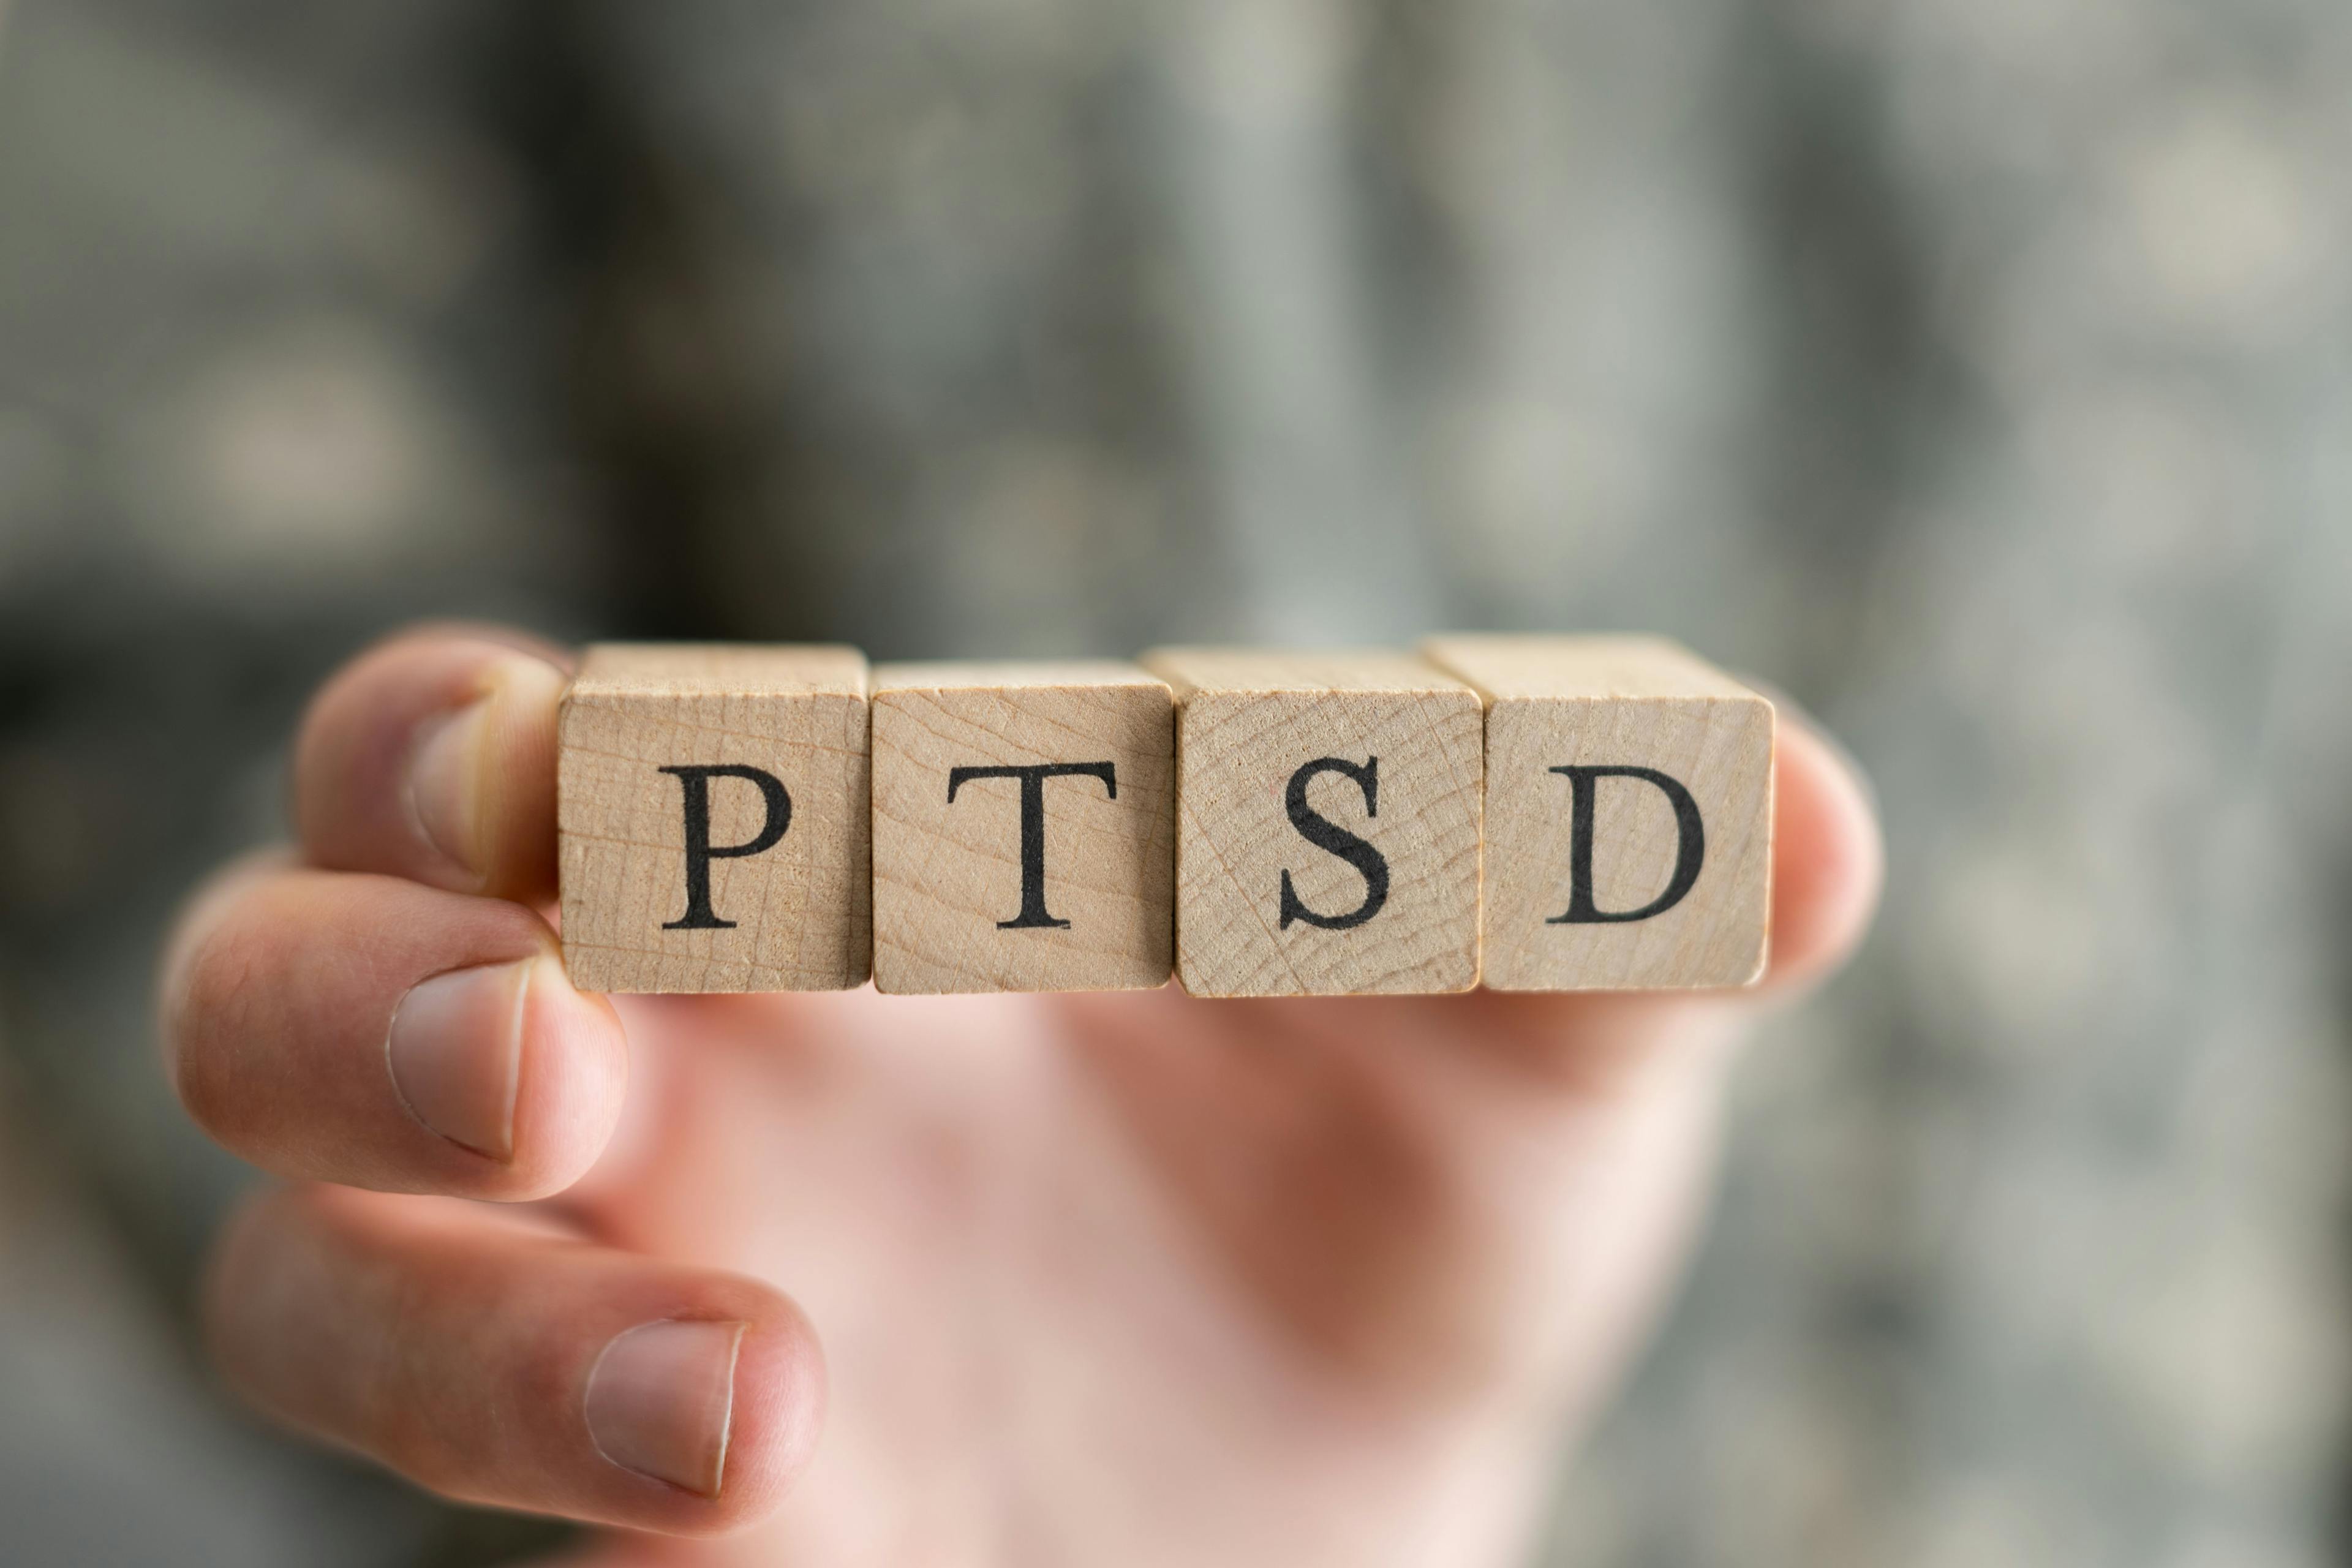 How can we more effectively help patients with PTSD? Charles B. Nemeroff discusses the diagnosis, epidemiology, and pathophysiology of PTSD, along with current and emerging treatments, at the 2022 APA Annual Meeting.